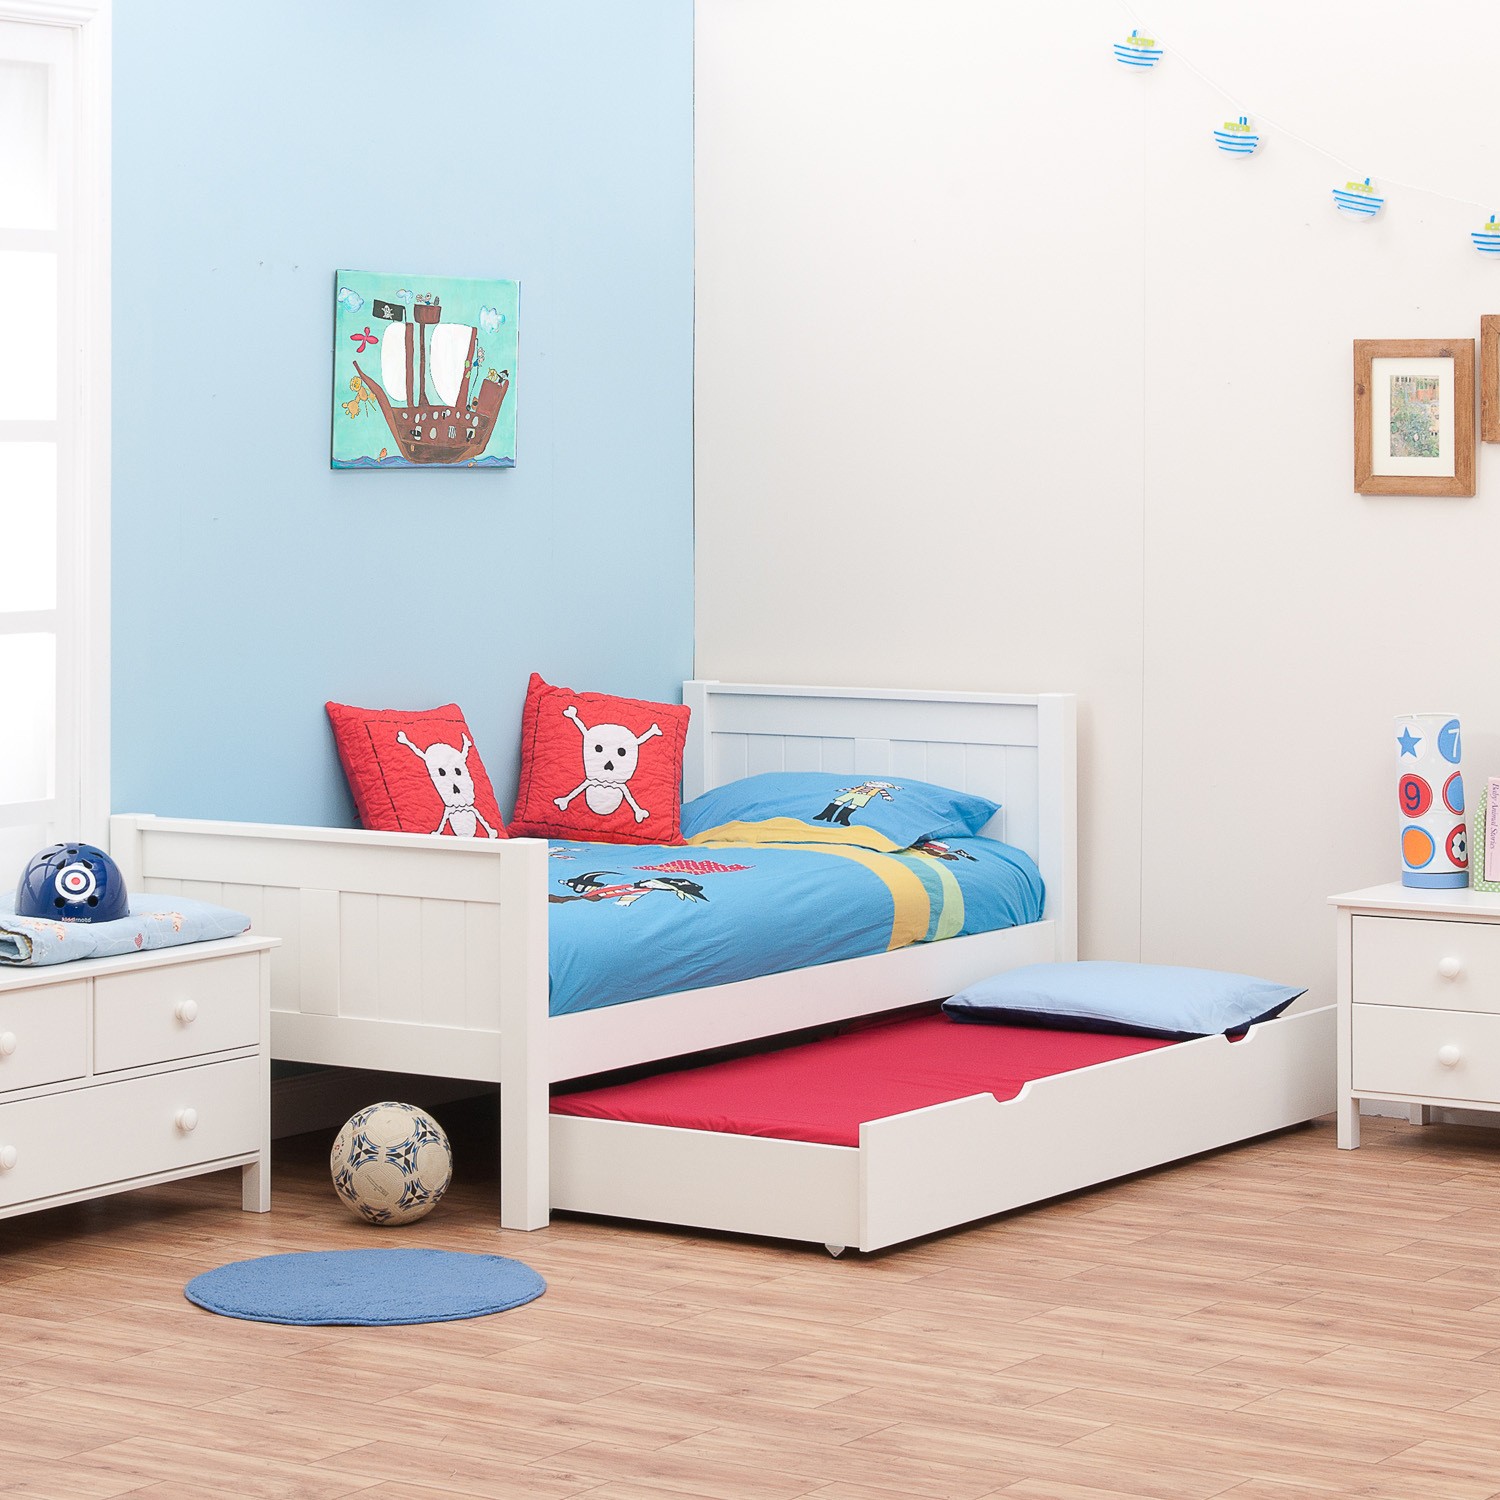 Classic single bed with trundle bed by stompa